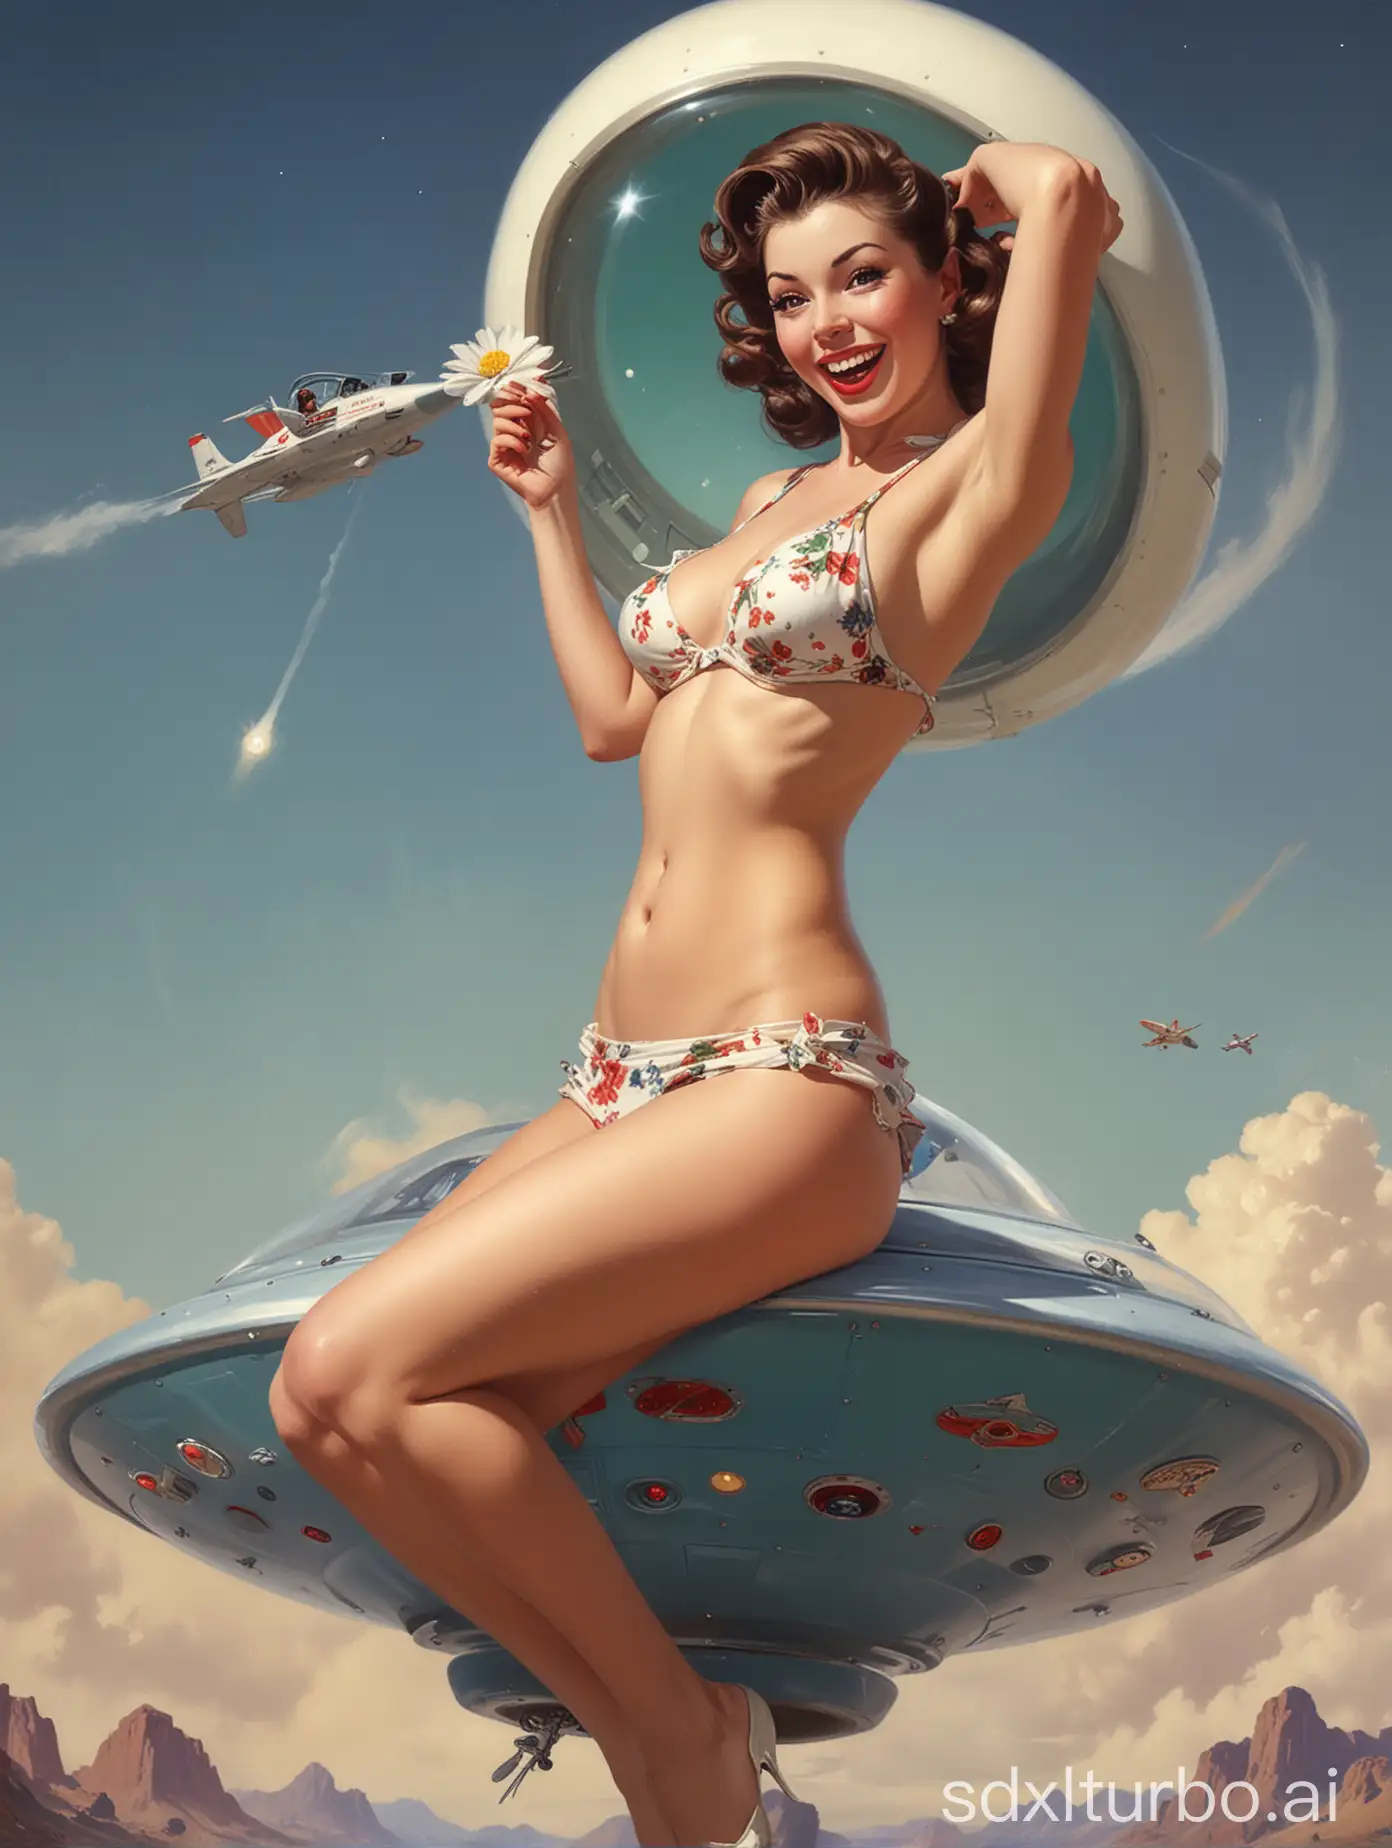 Seductive-PinUp-Woman-Poses-Playfully-on-UFO-Womanizer